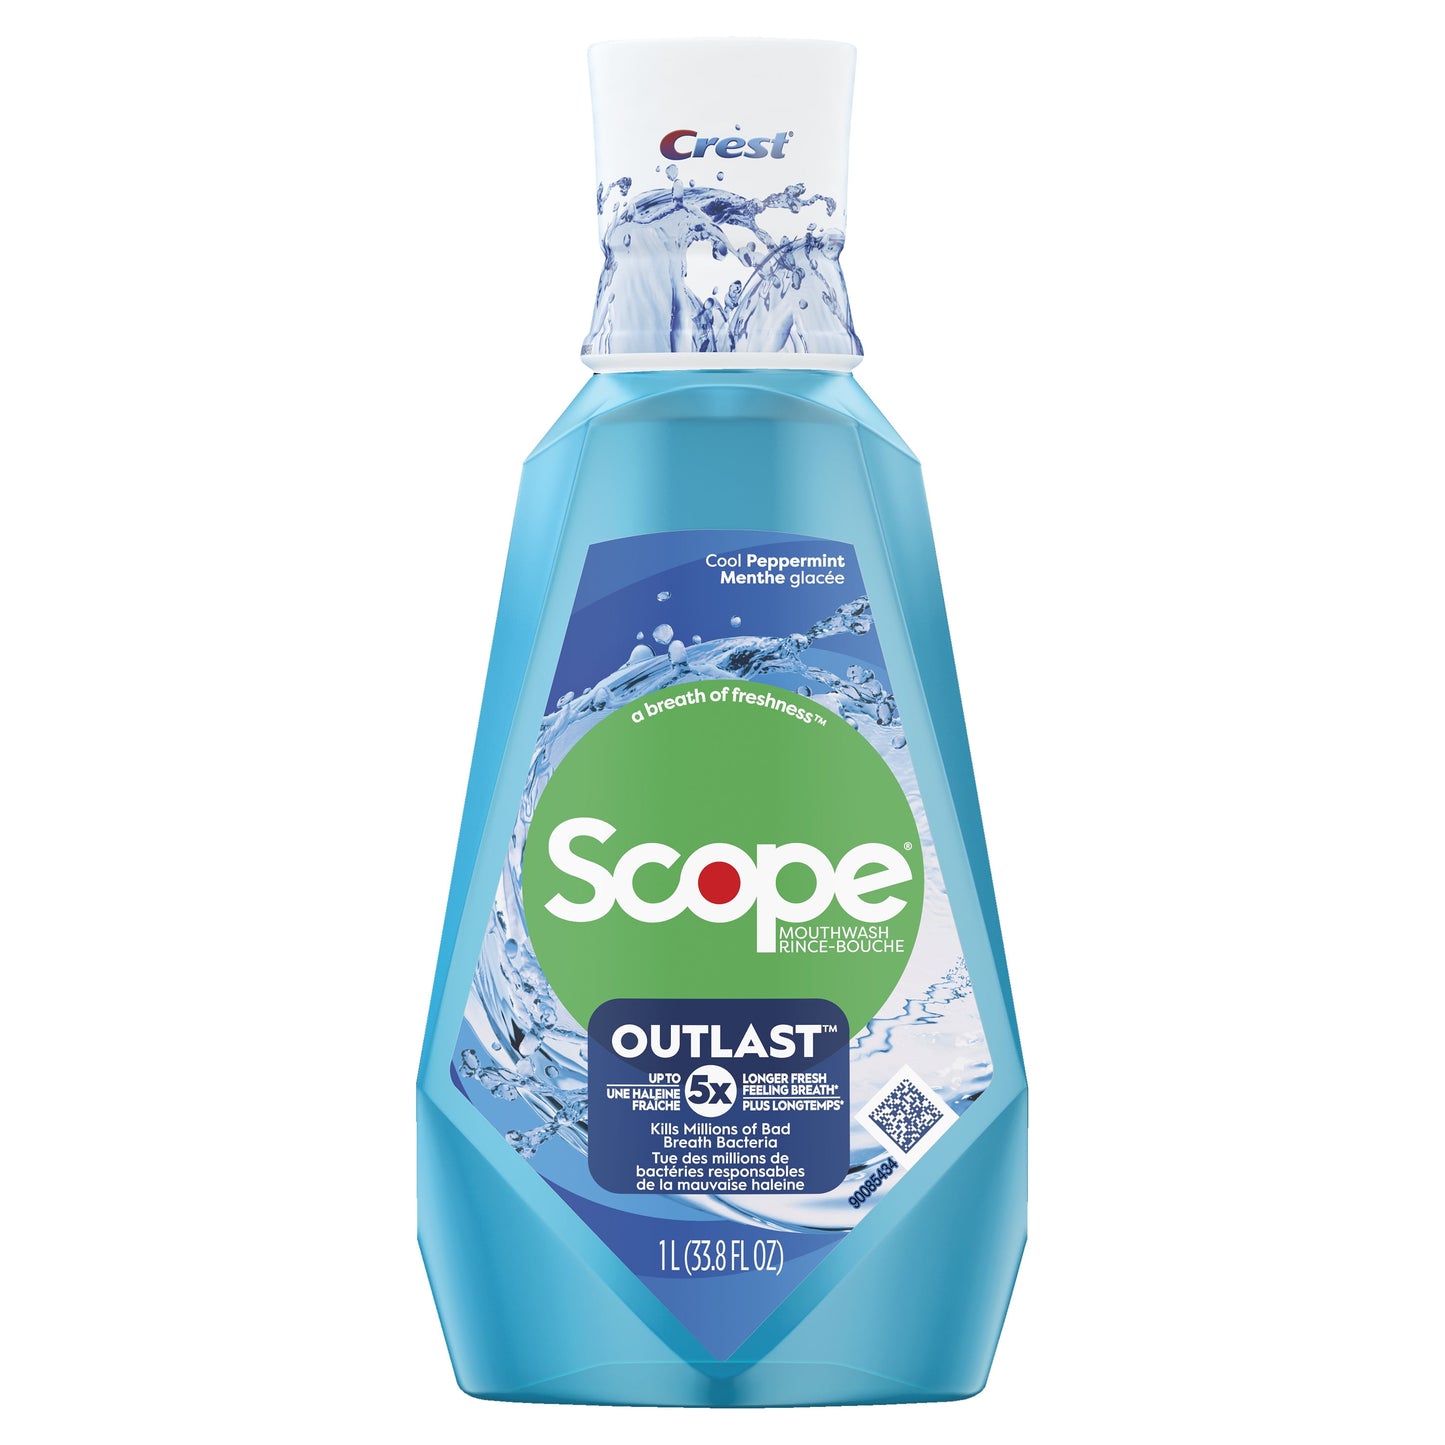 Crest Scope Outlast Mouthwash, Cool Peppermint, 1L 33.8 fl oz, for Adults and Children 6+